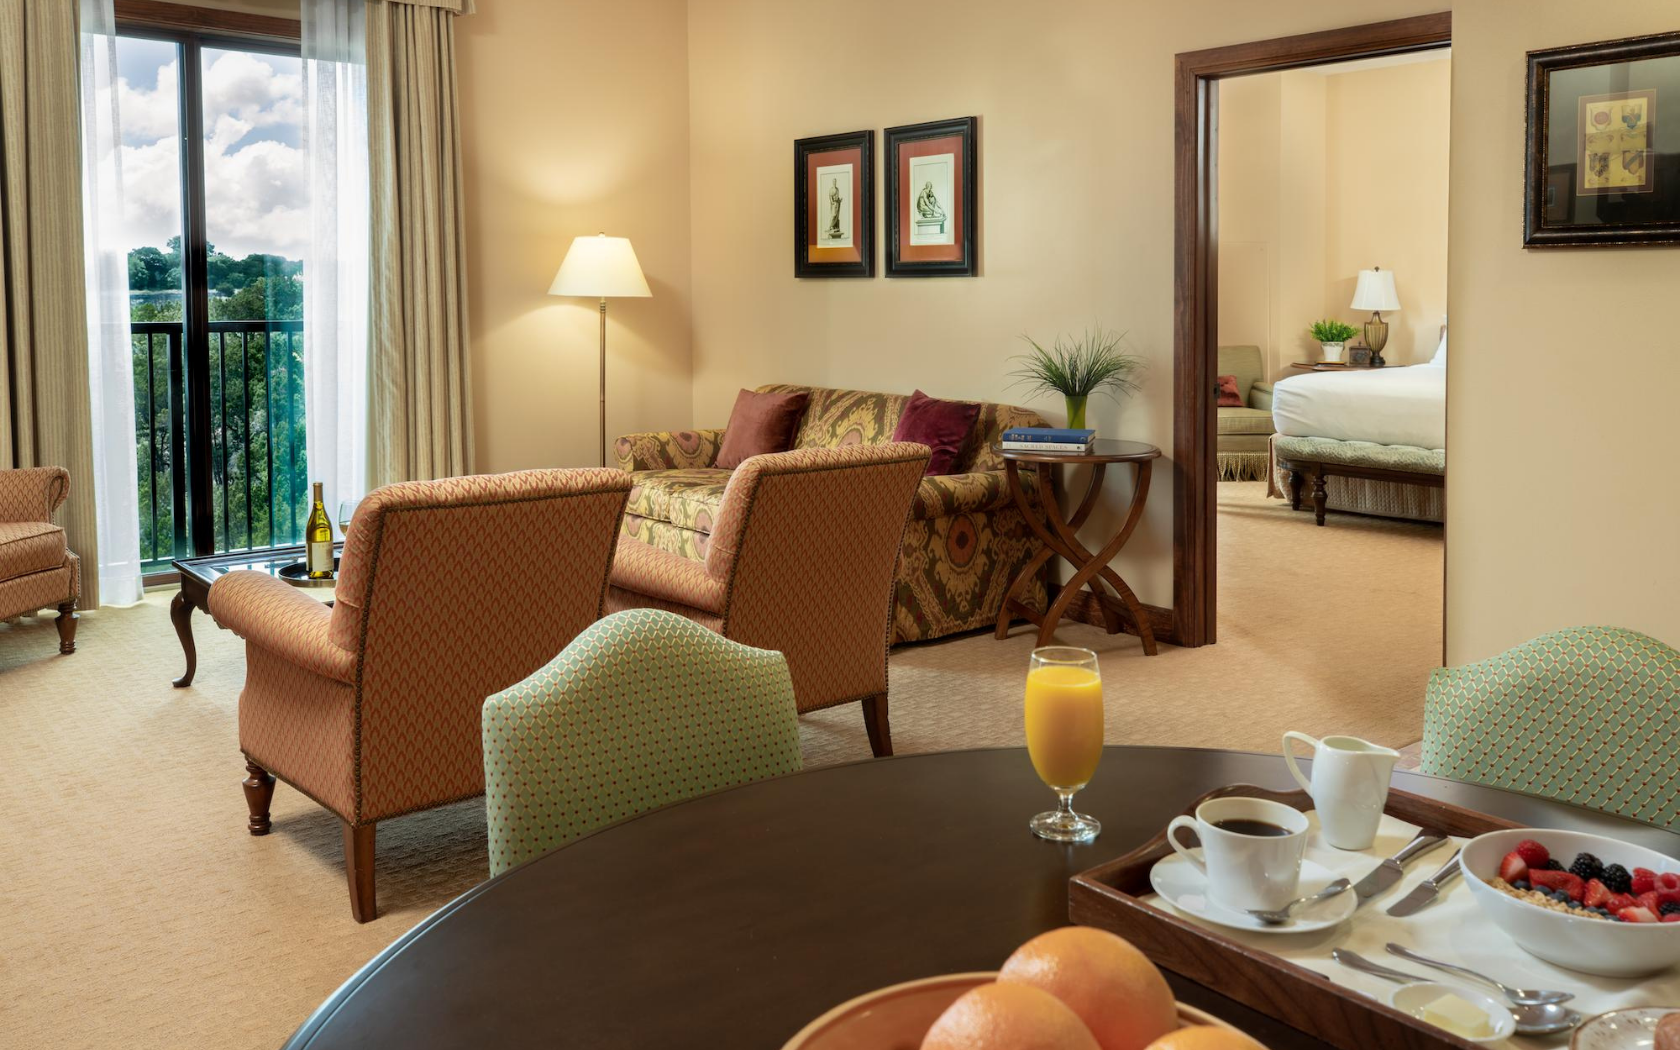 beautiful suite with breakfast on table